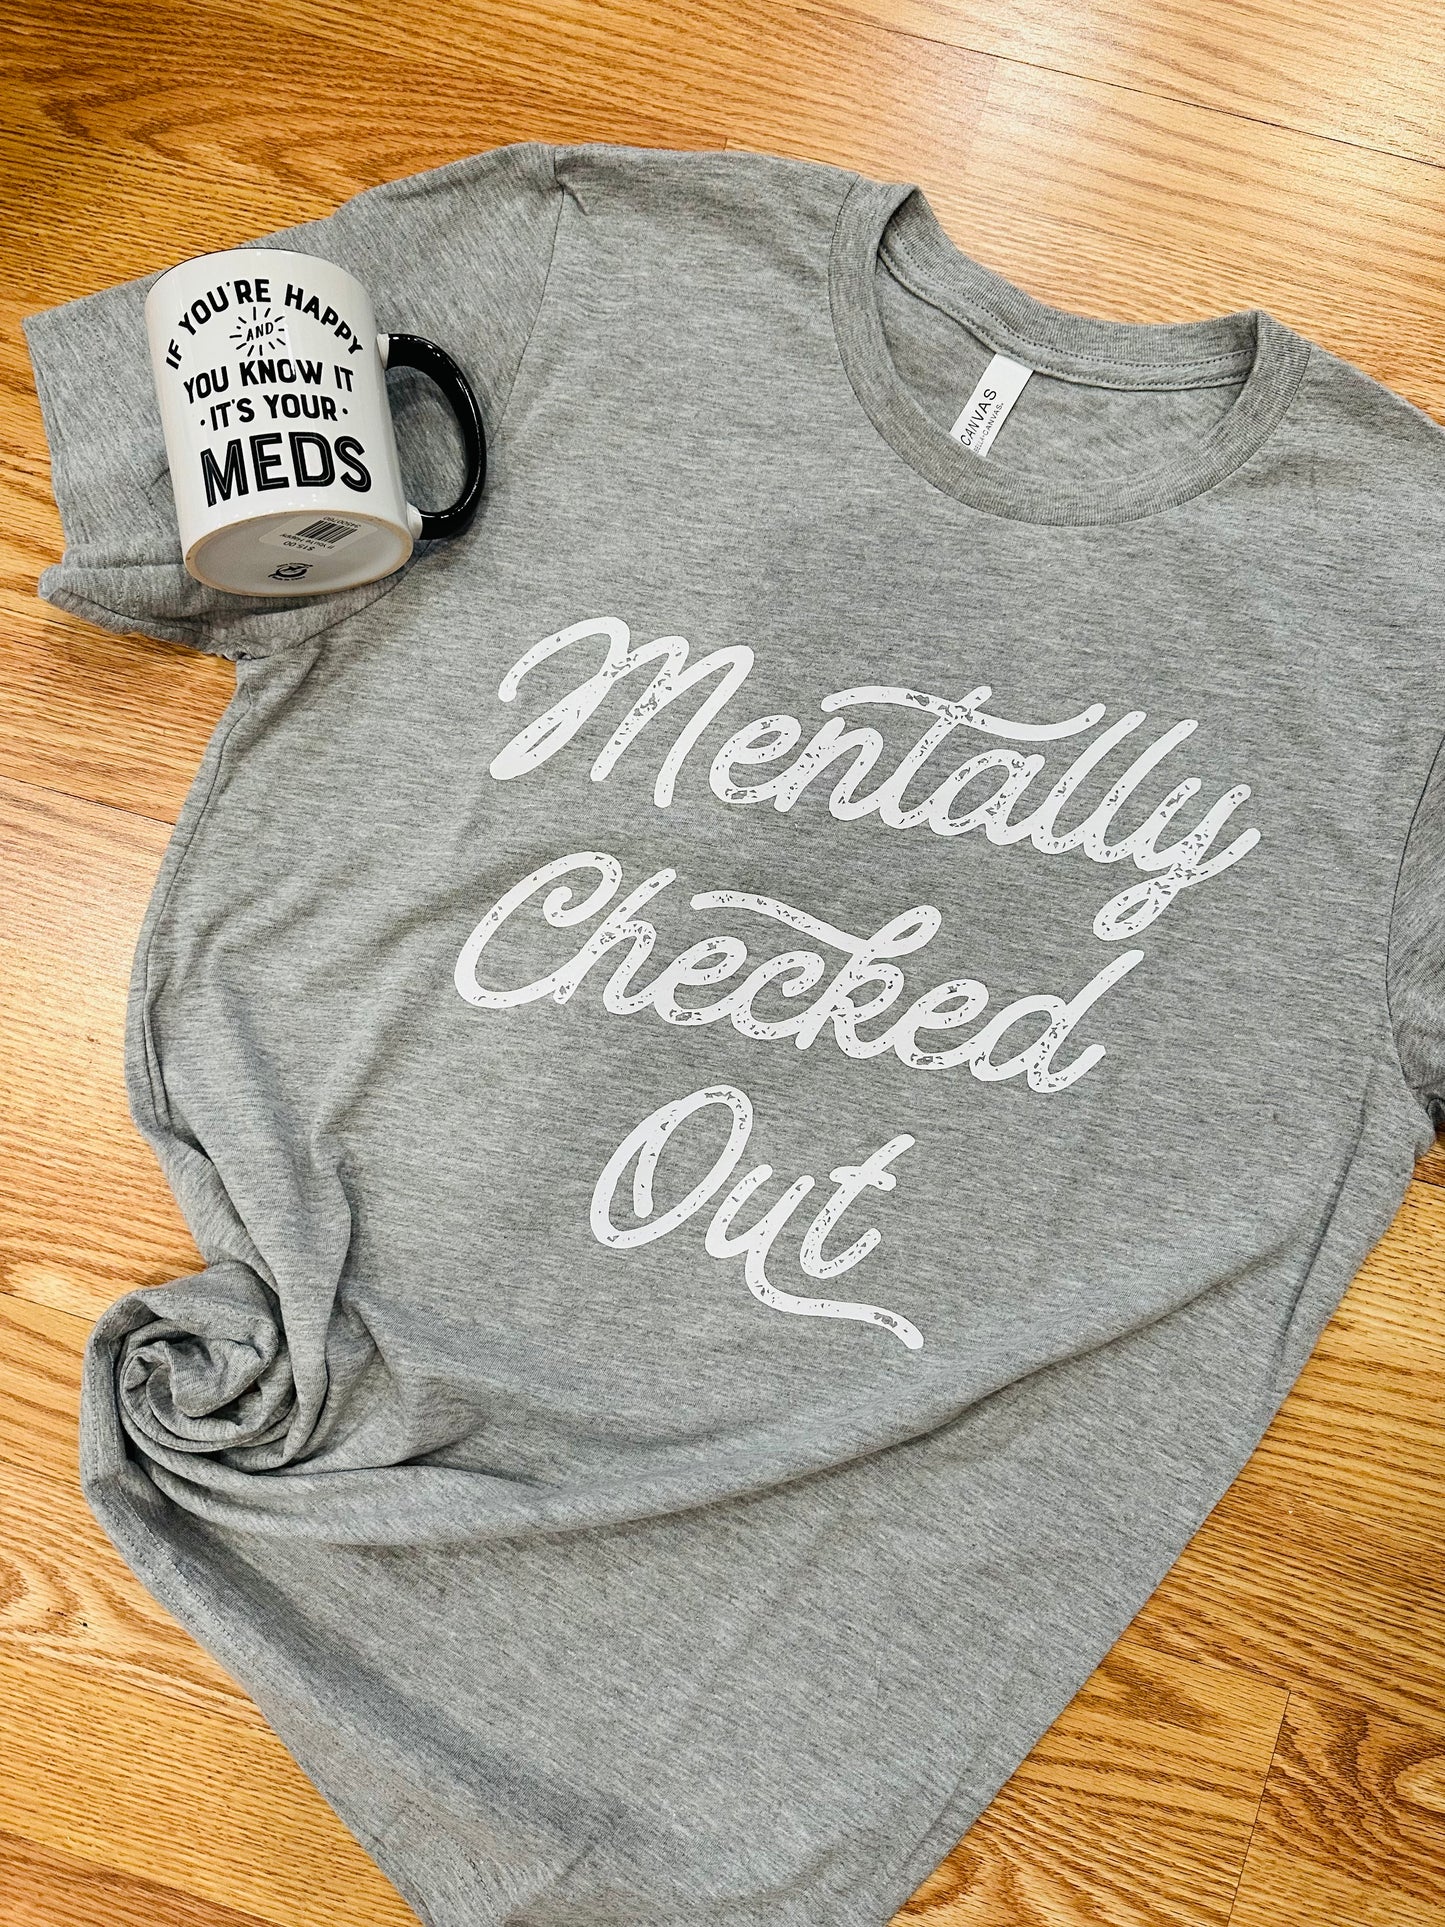 Mentally Checked Out